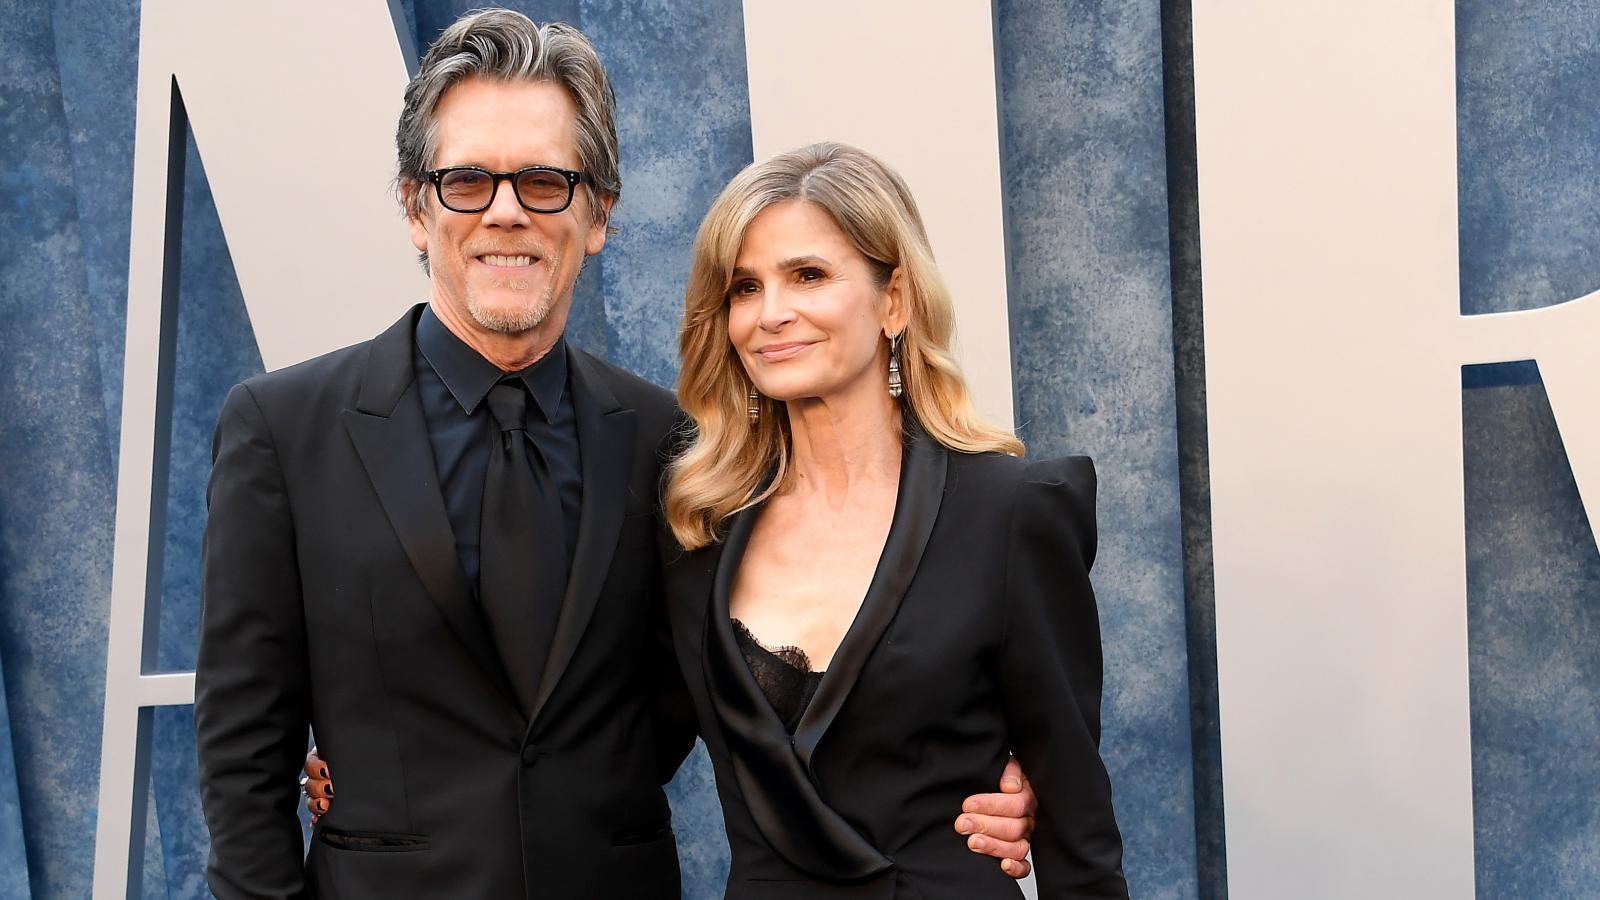 Kevin Bacon and Kyra Sedgwick - Longest Celebrity Marriages